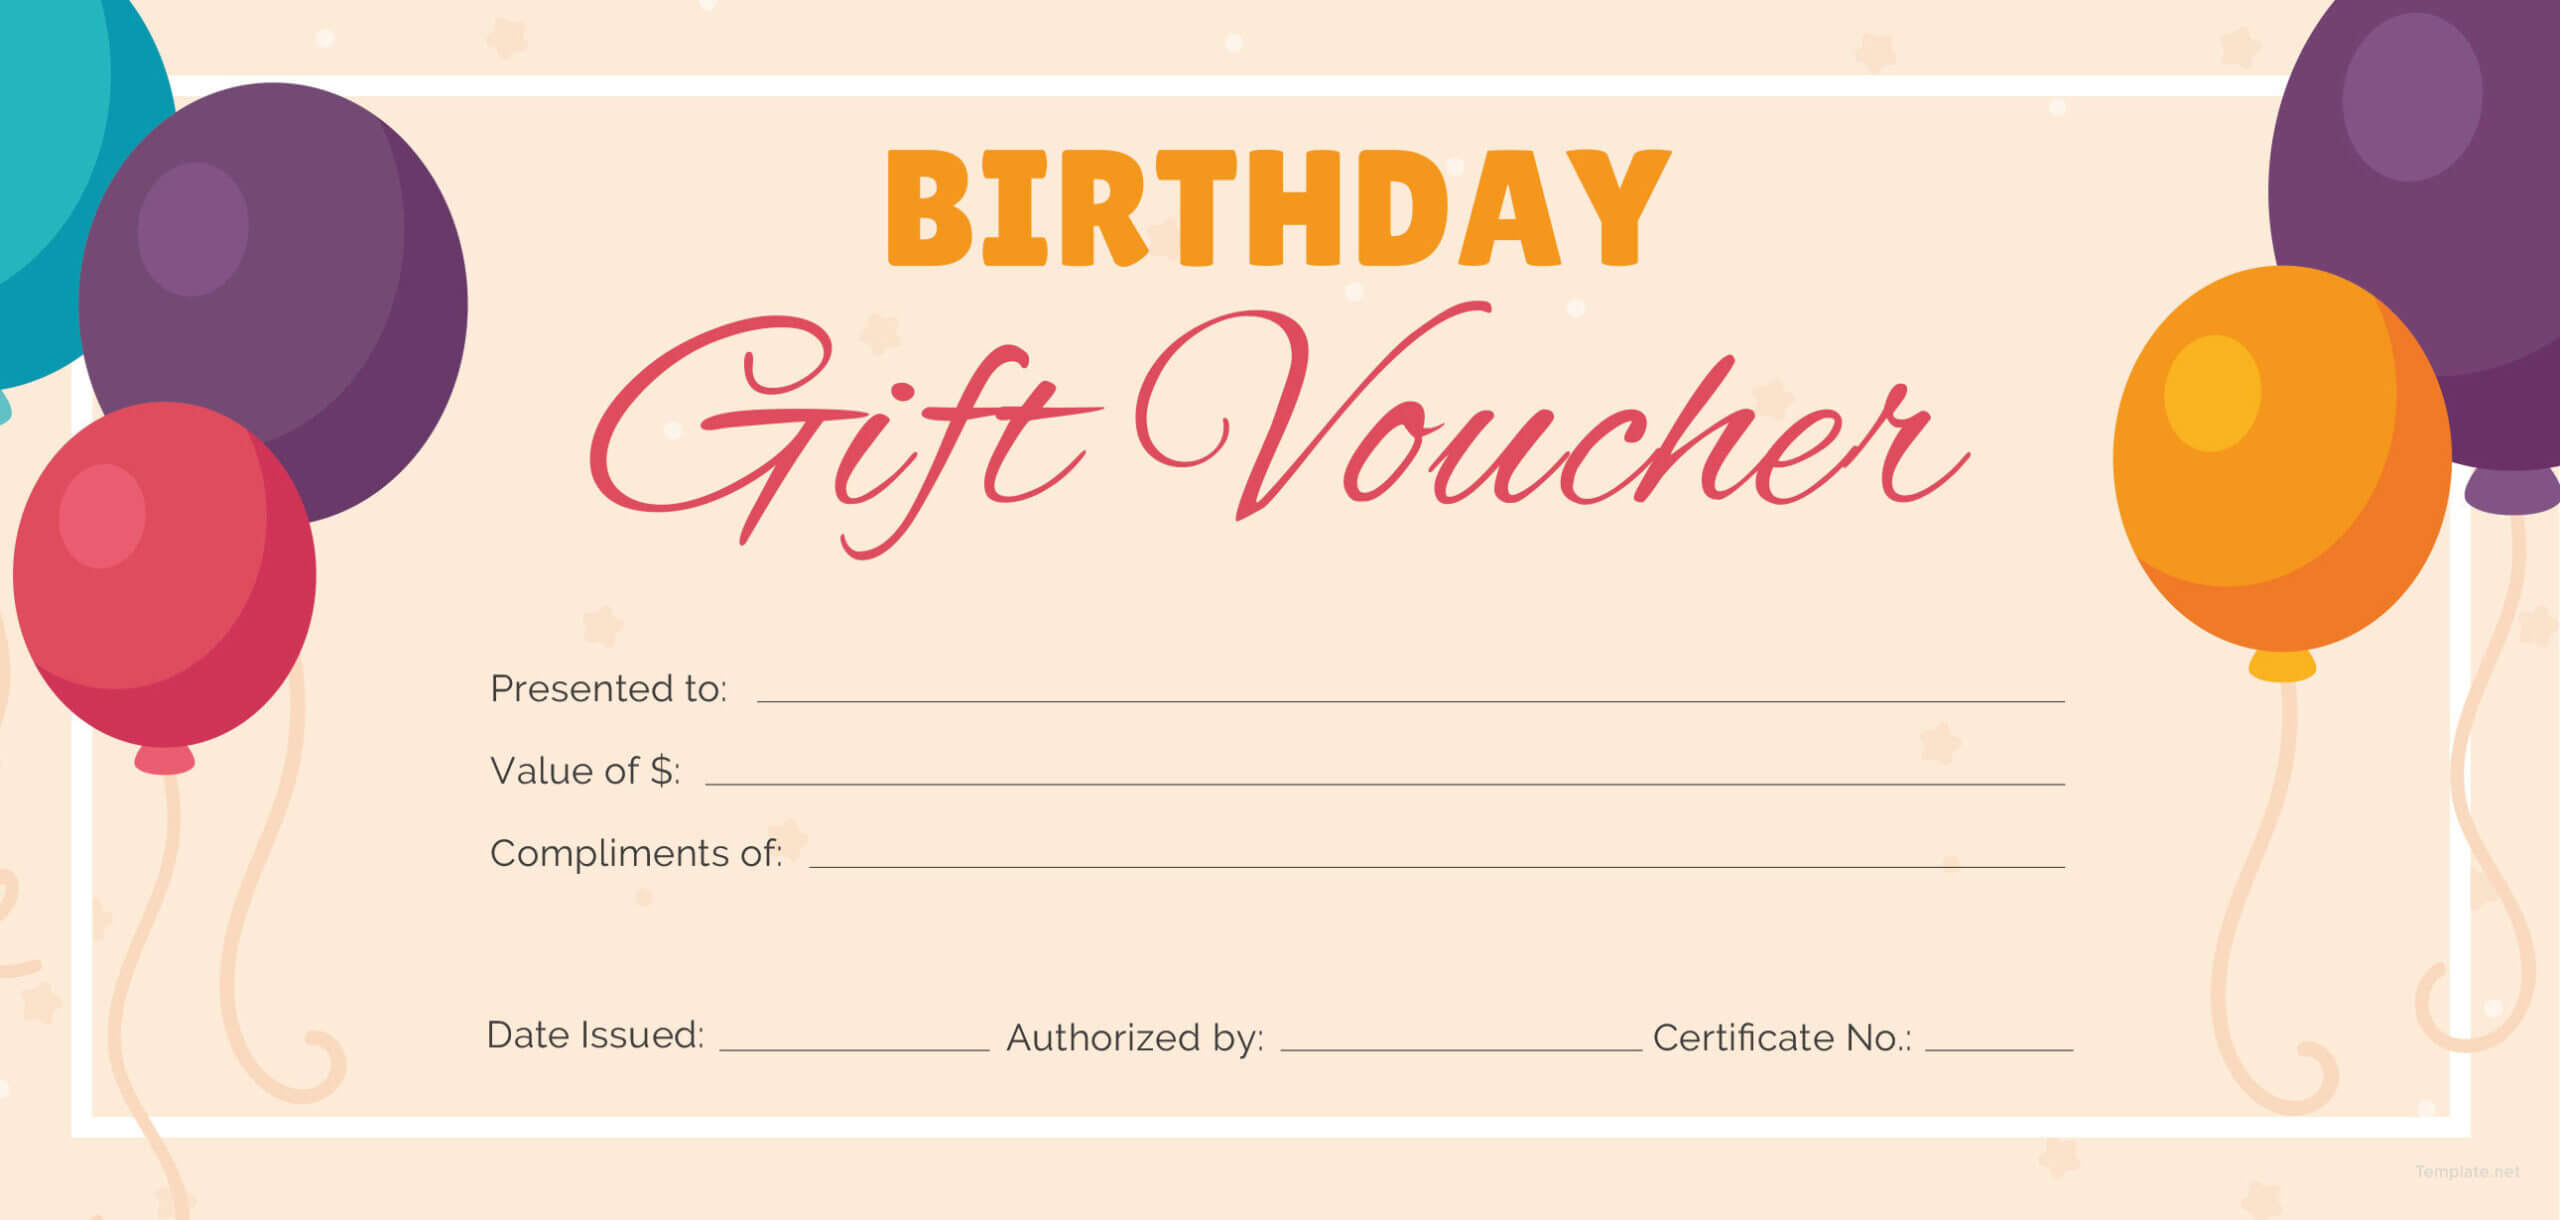 Free Birthday Gift Certificate Templates | Certificate Within Track And Field Certificate Templates Free